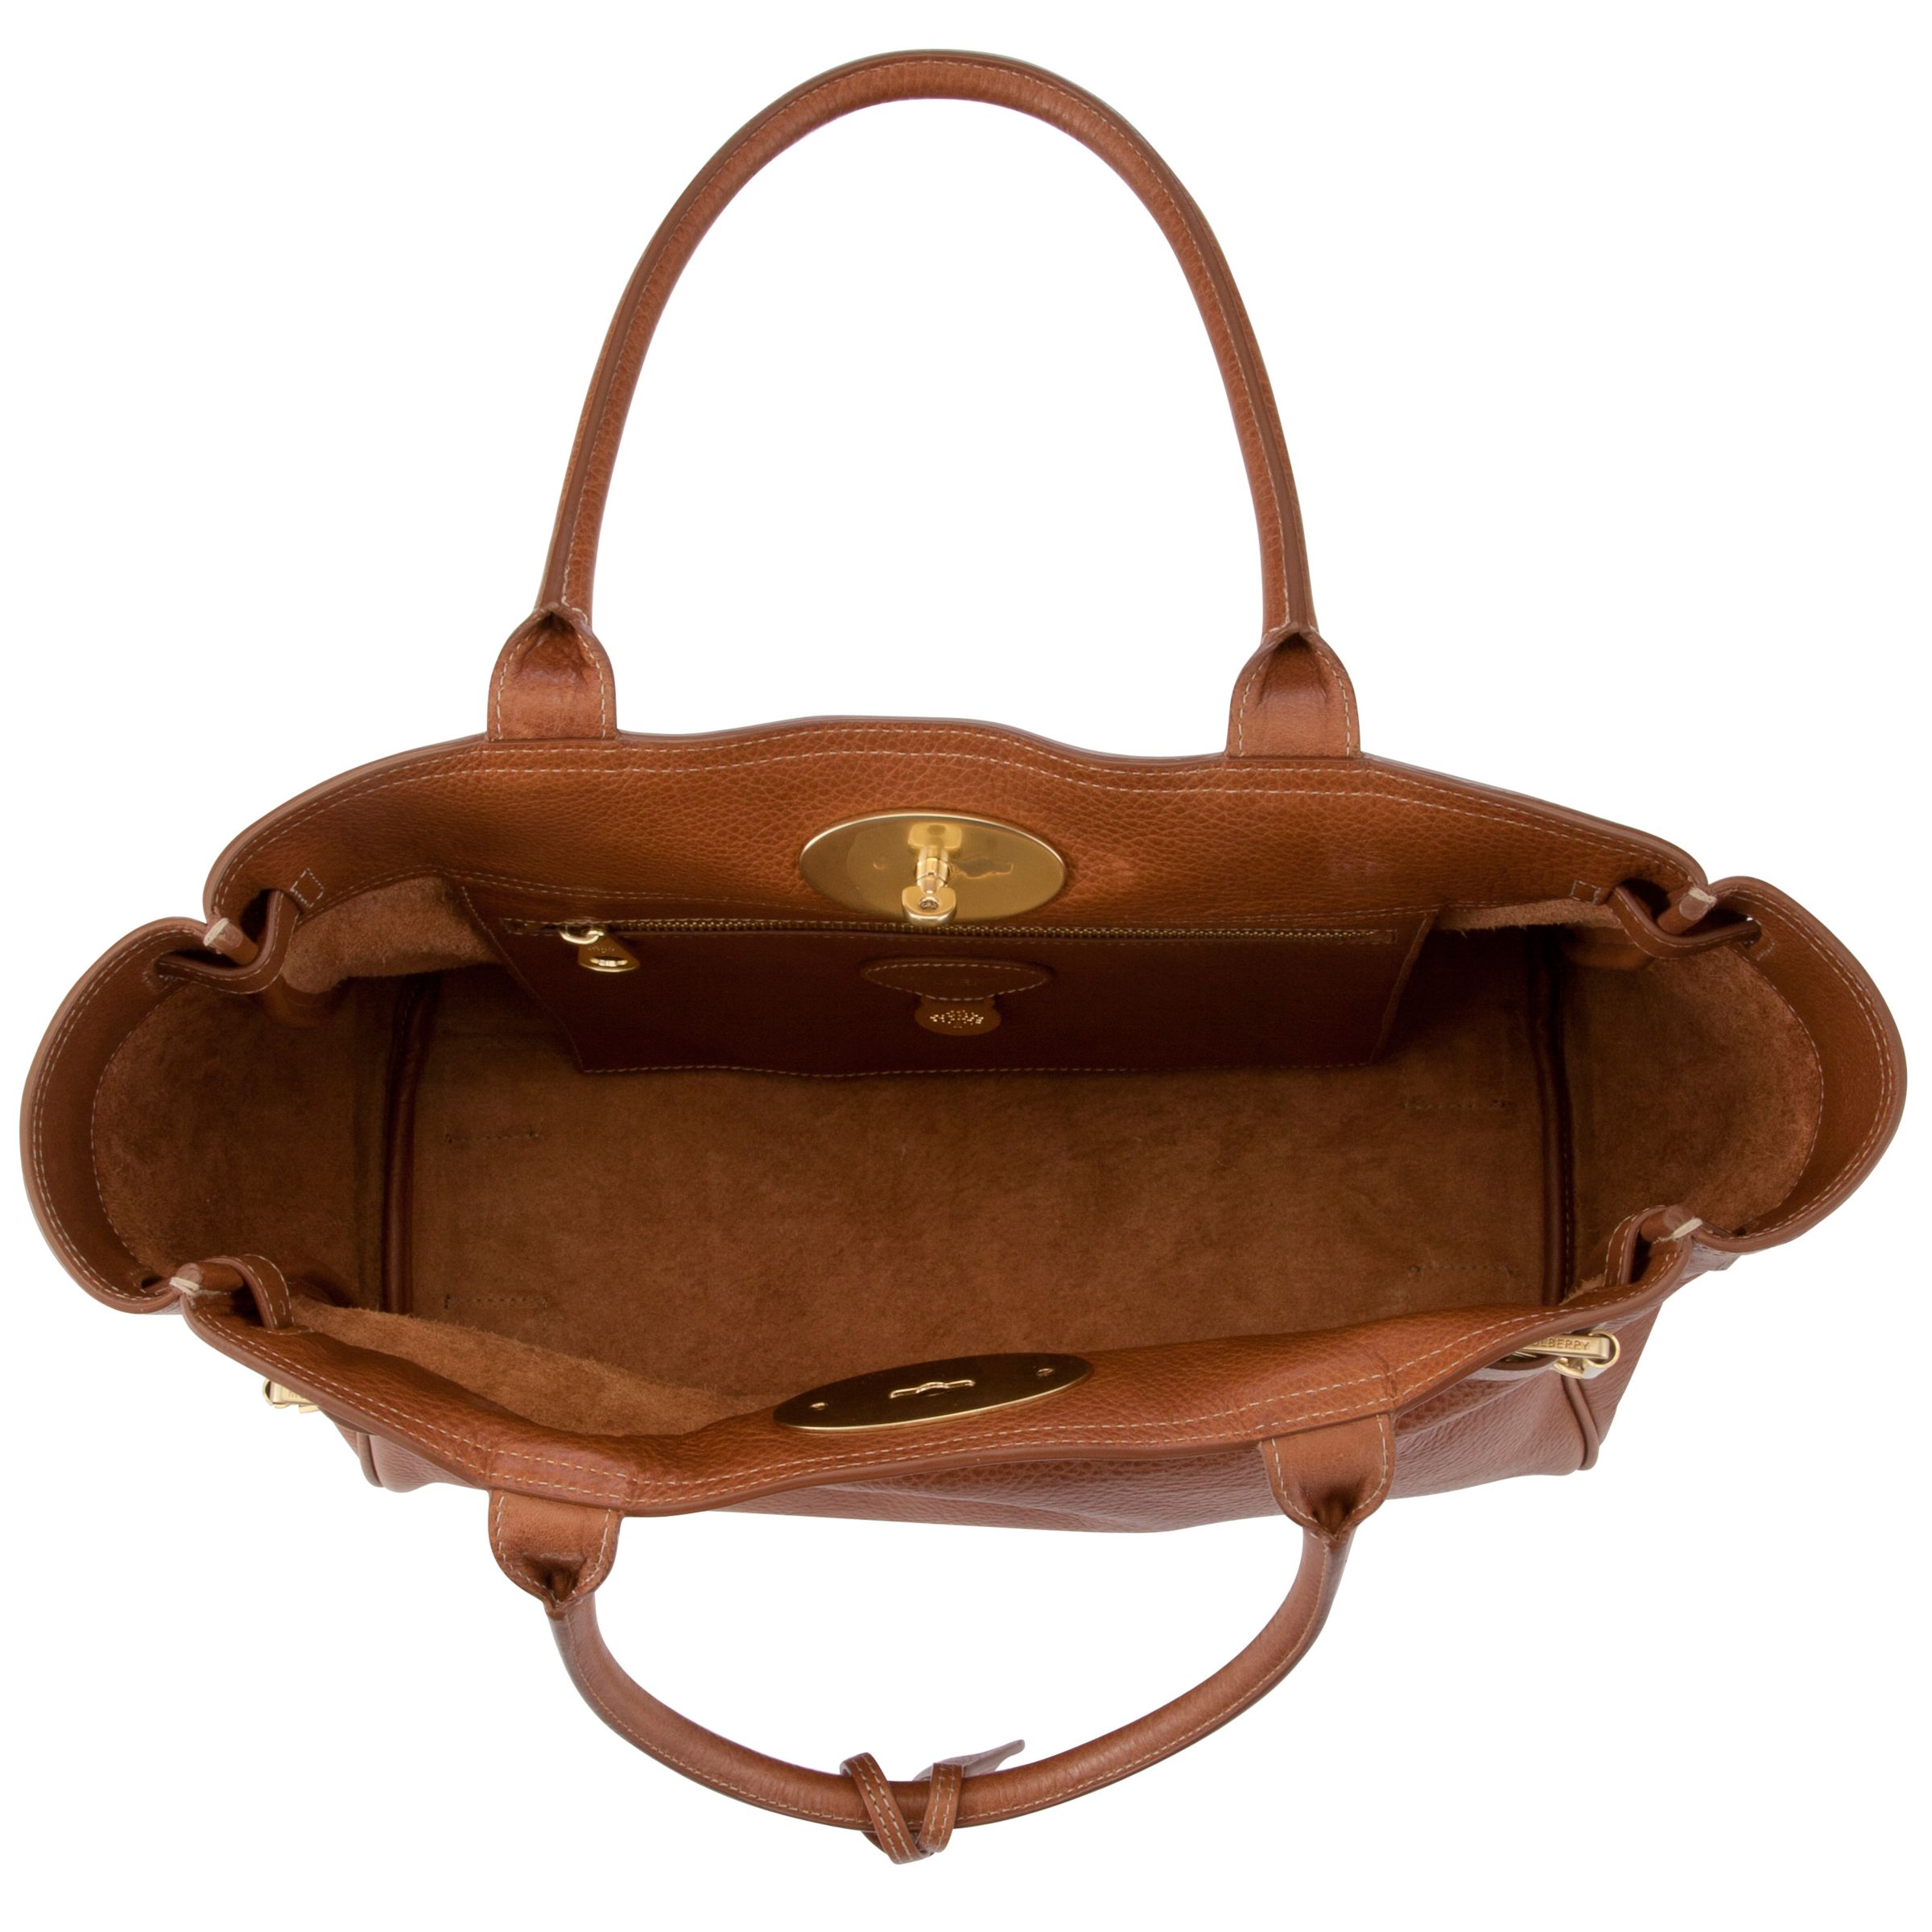 Buy Mulberry Bayswater Leather Tote Bag Online at johnlewis.com